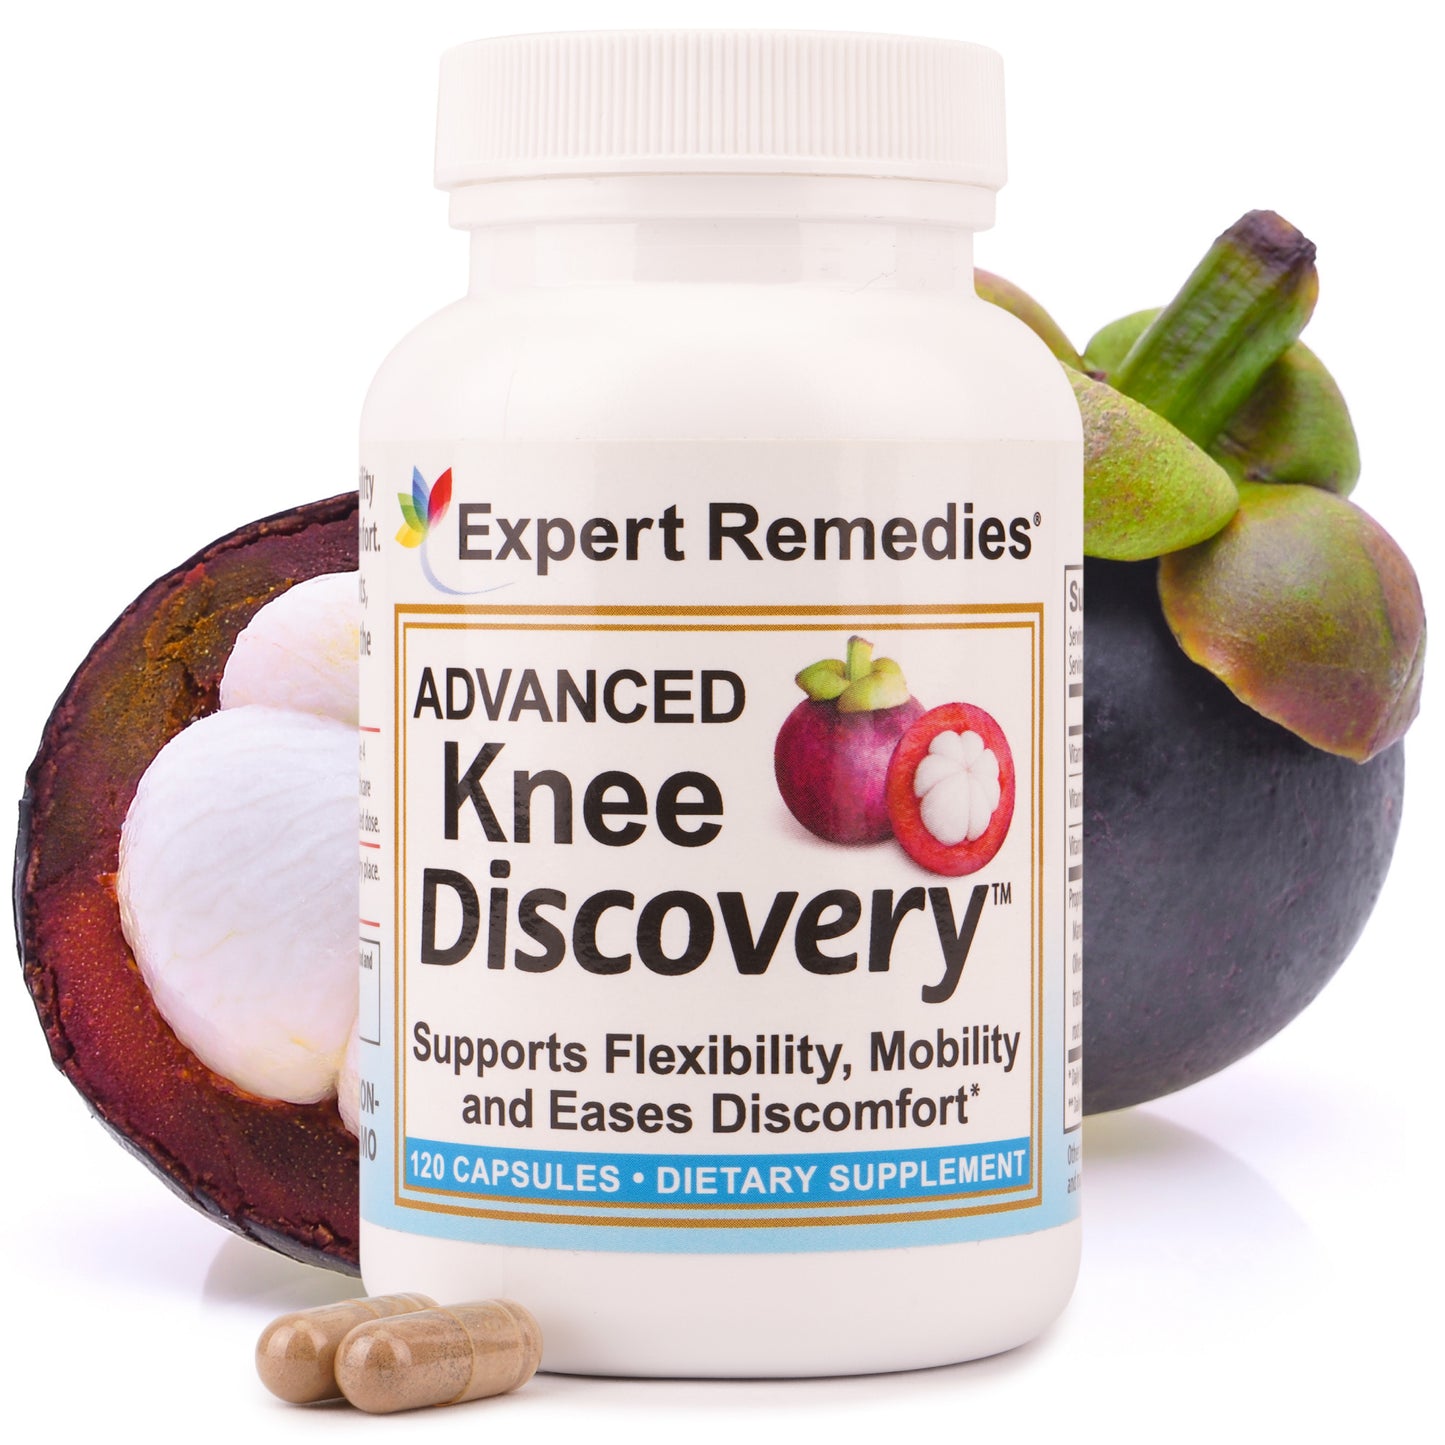 Get 1 Bottle of Advanced Knee Discovery